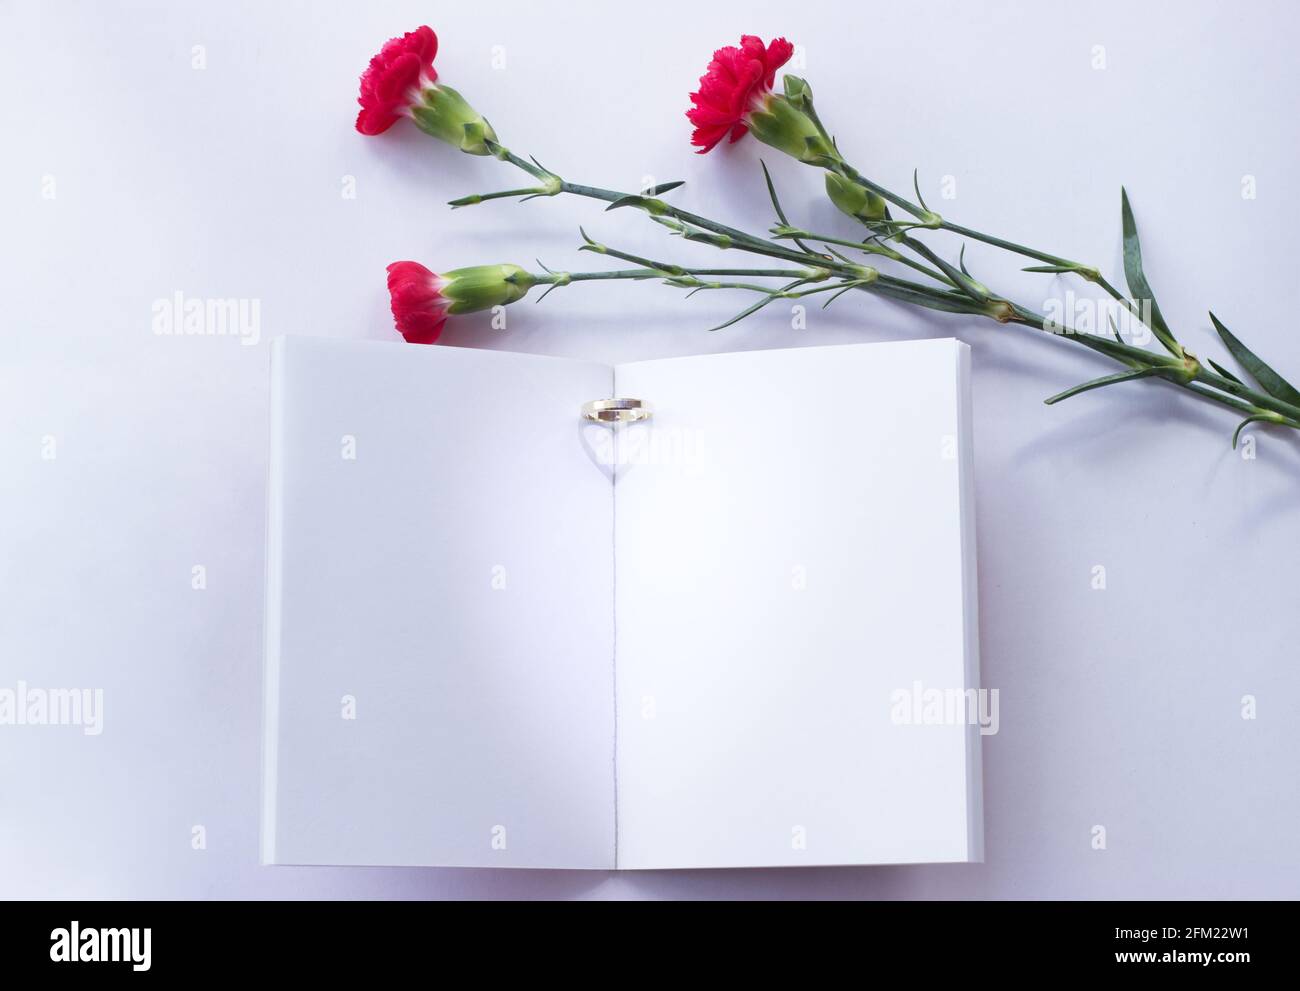 Summer wedding mockup. Blank wedding book on a white table. Wedding ring is placed on the book and the sunlight creates a heart-shaped shadow. Flowers Stock Photo